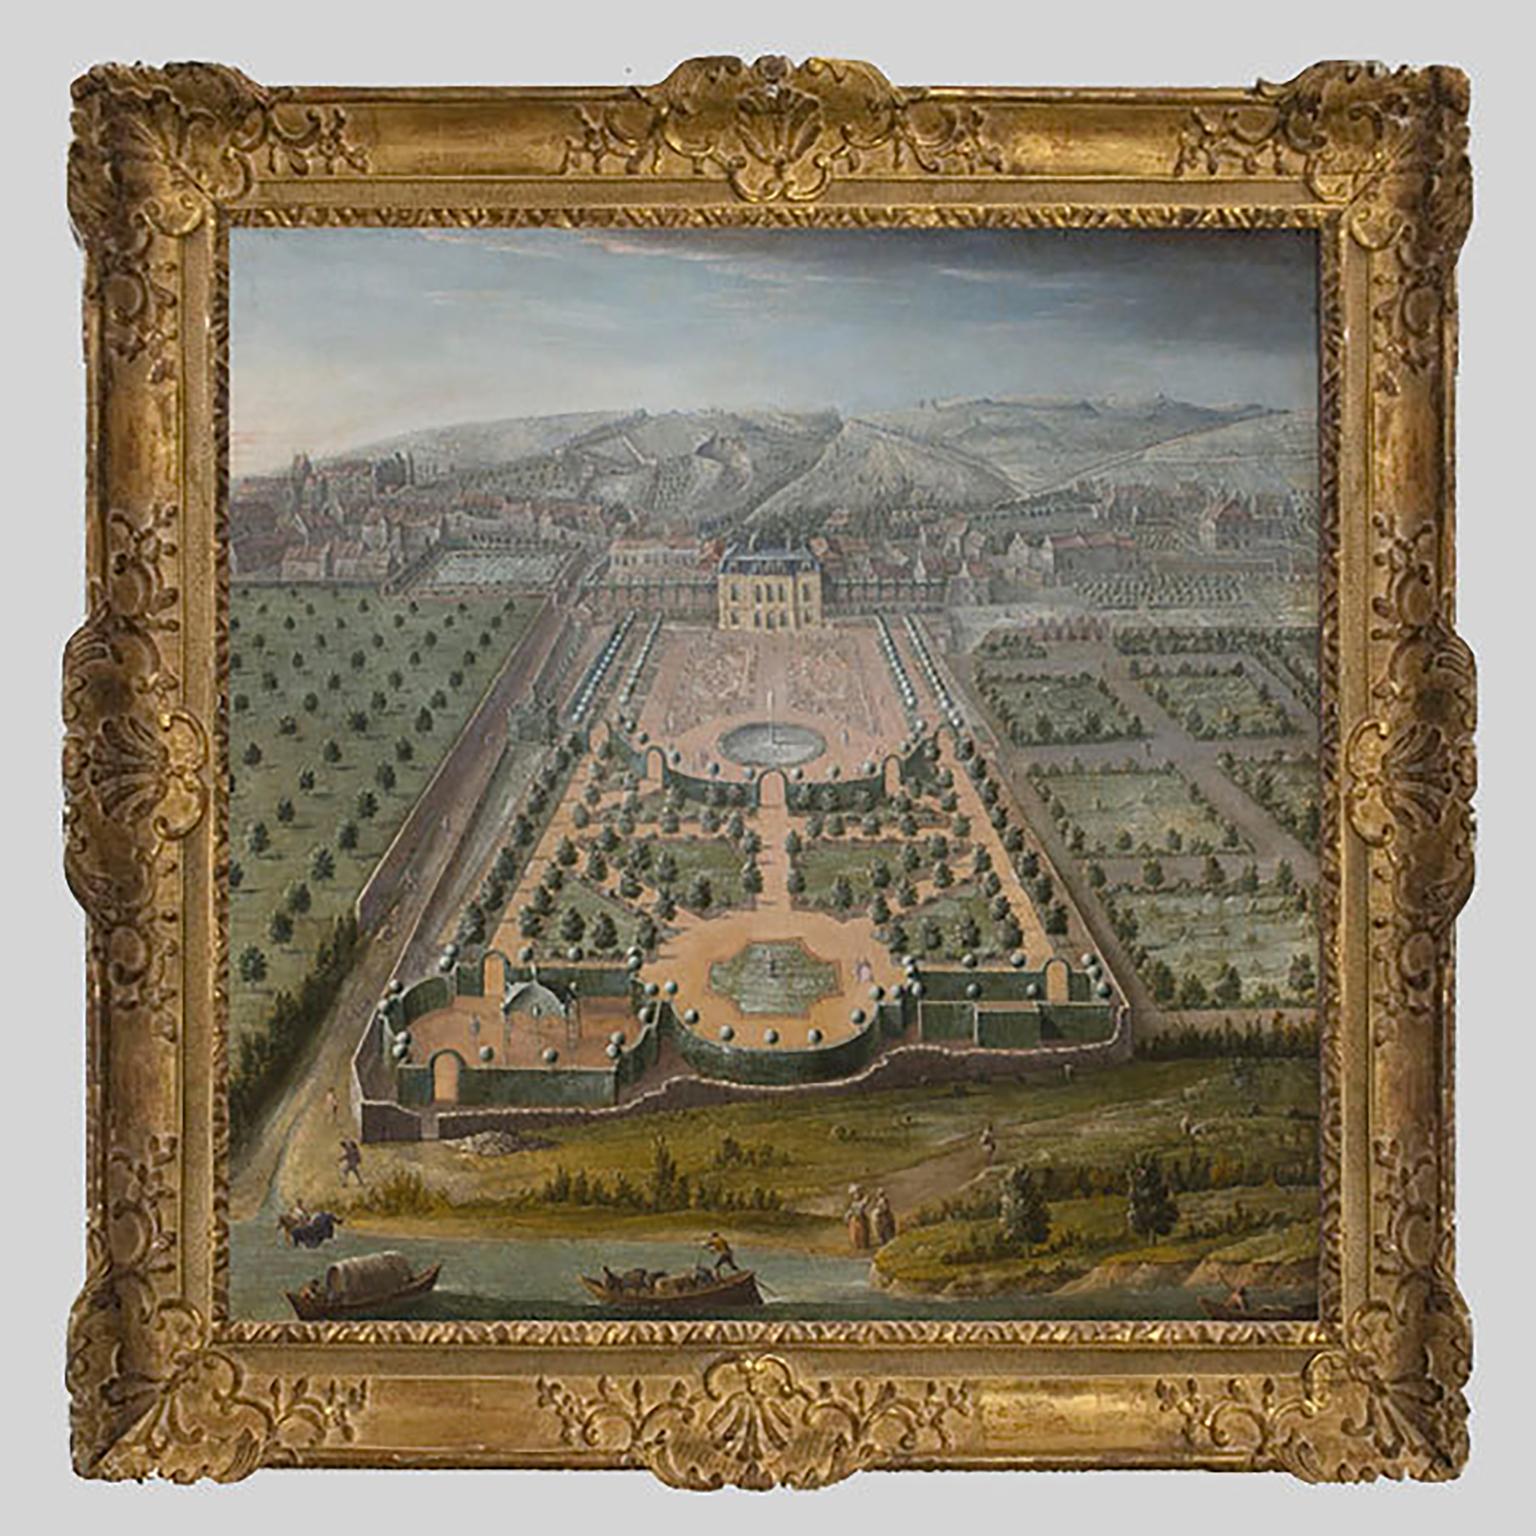 A pair of Topographical Portraits of the Pavillion and Village of Vaux-Sur-Seine, Painted for Jacques Fayolle, Ingenieur du Roi, by Pierre-Denis Martin. The House Almost Certainly Designed by Robert de Cotte (1717-1734).
Also Known Latterly as the